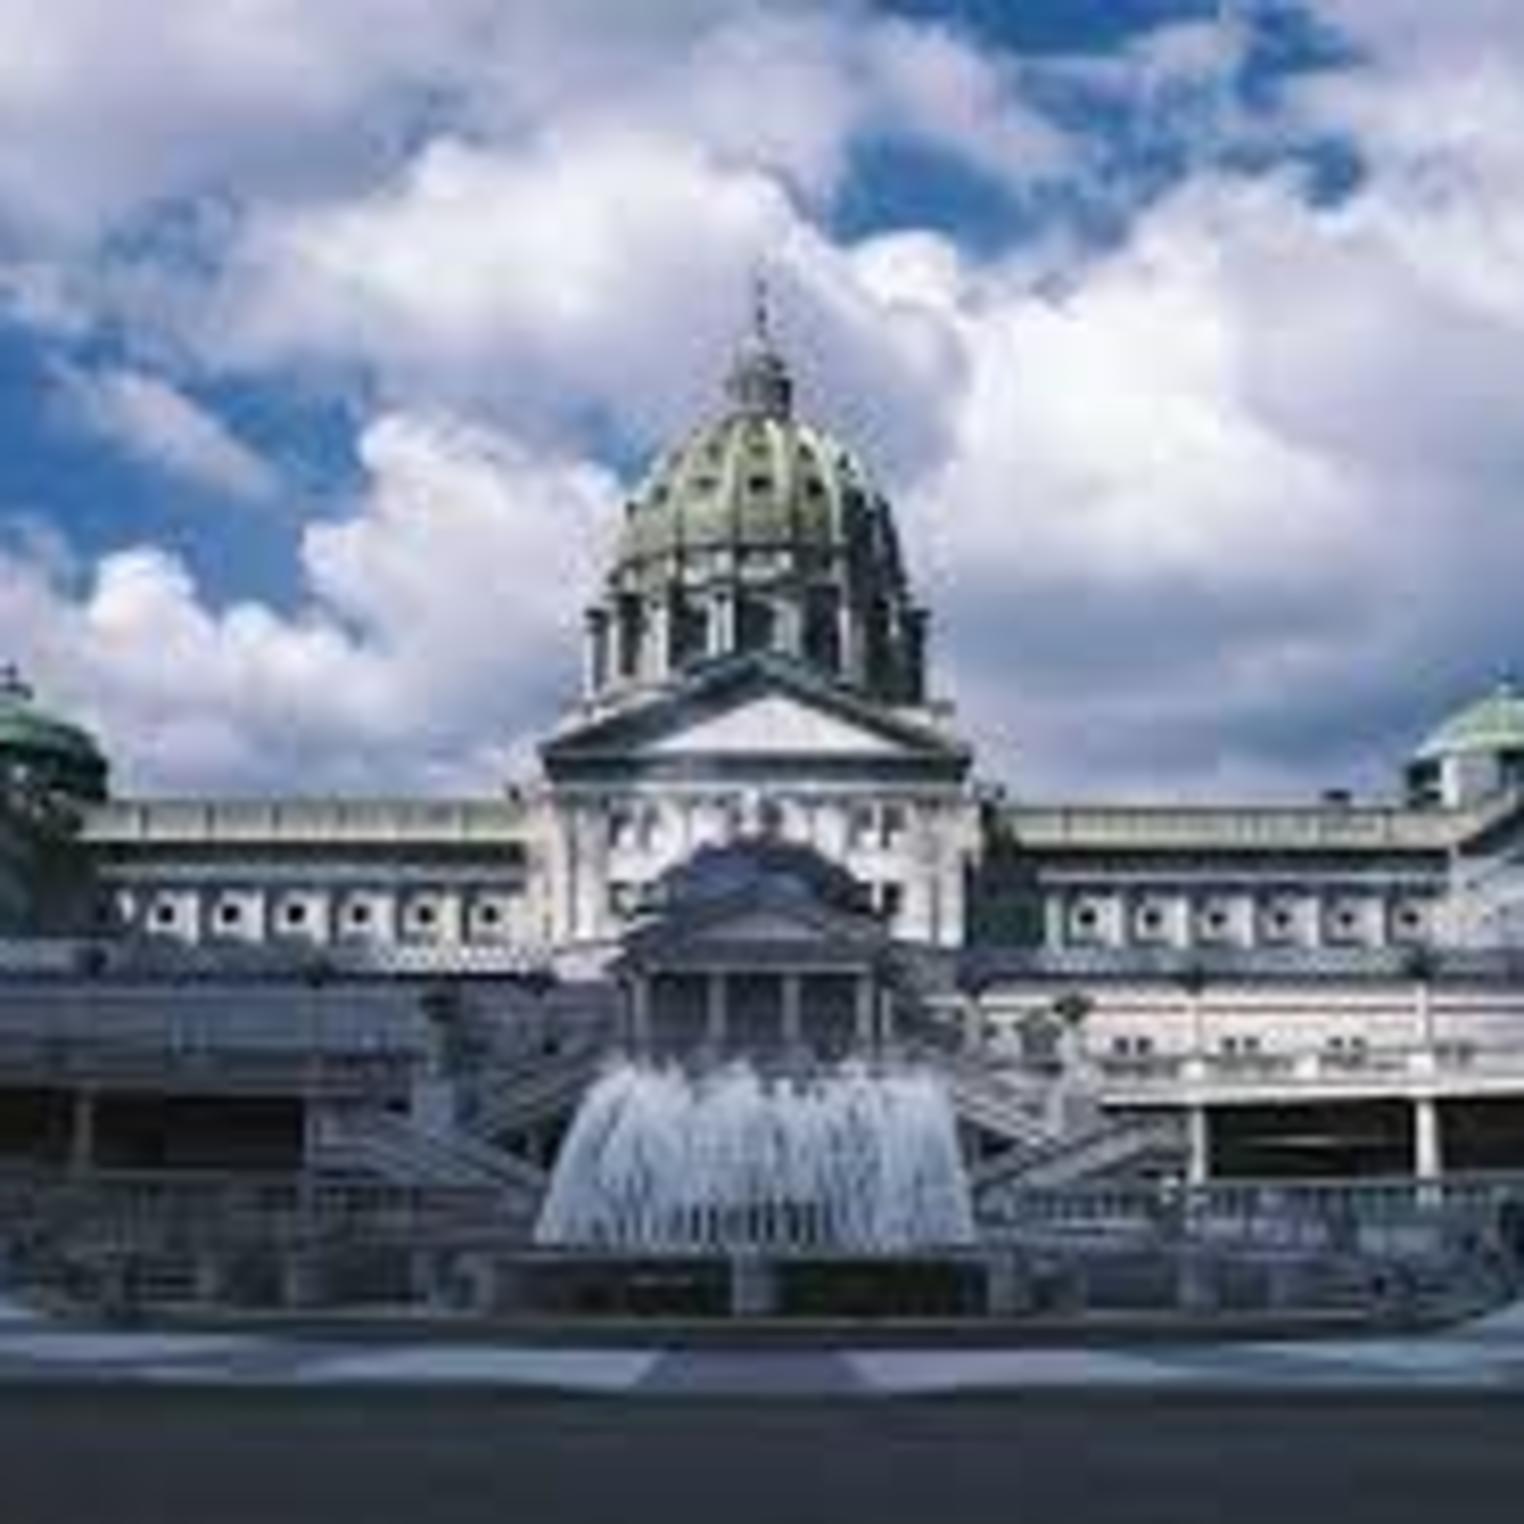 PA State Capitol Building